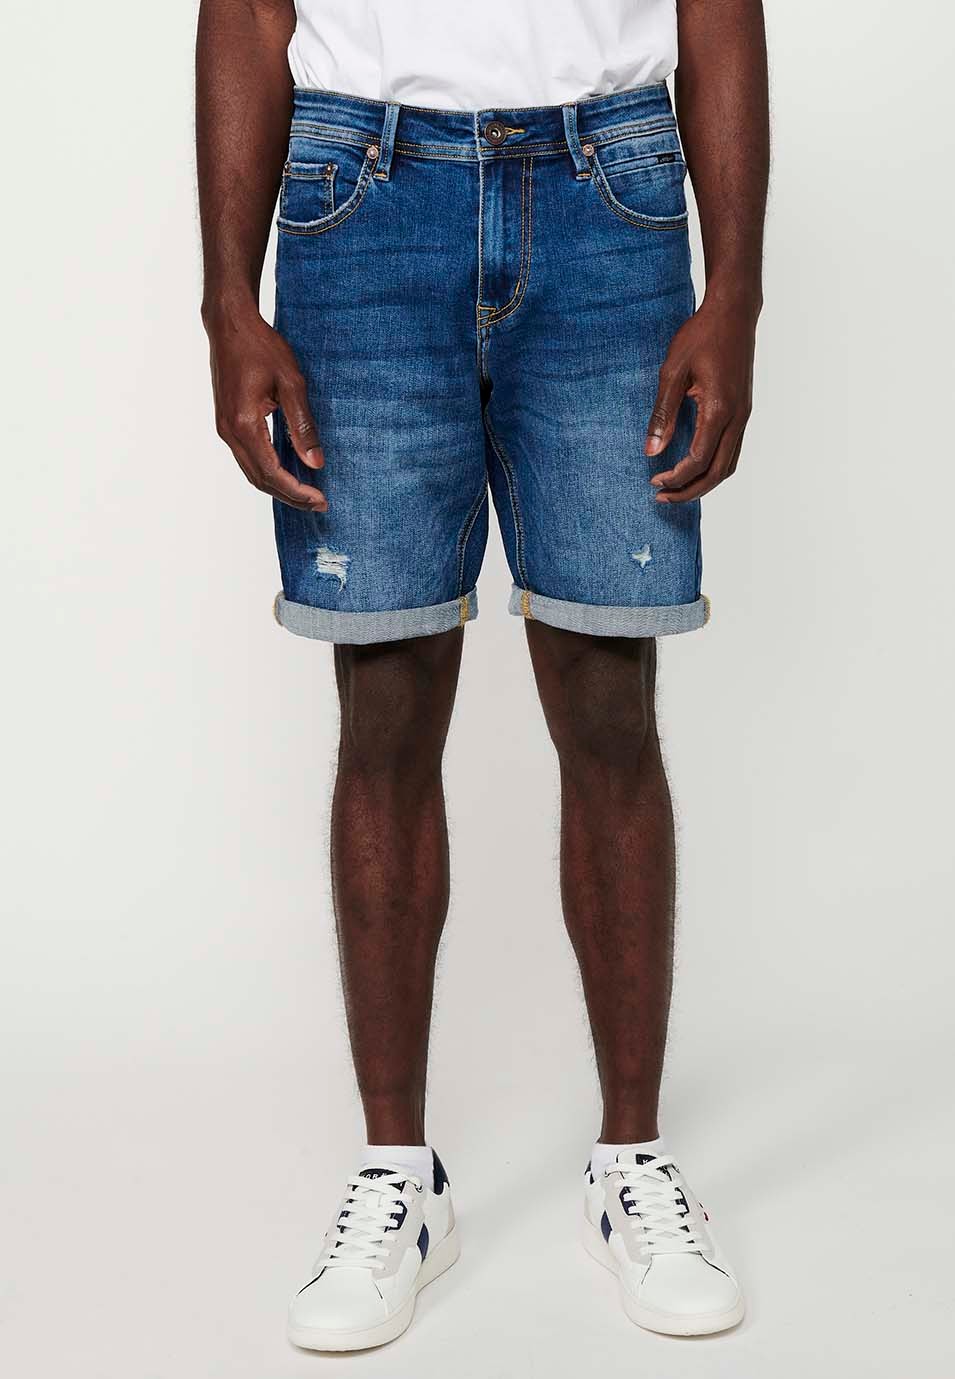 Shorts with turn-up finish and front zipper and button closure with five pockets, one blue pocket pocket for Men 7